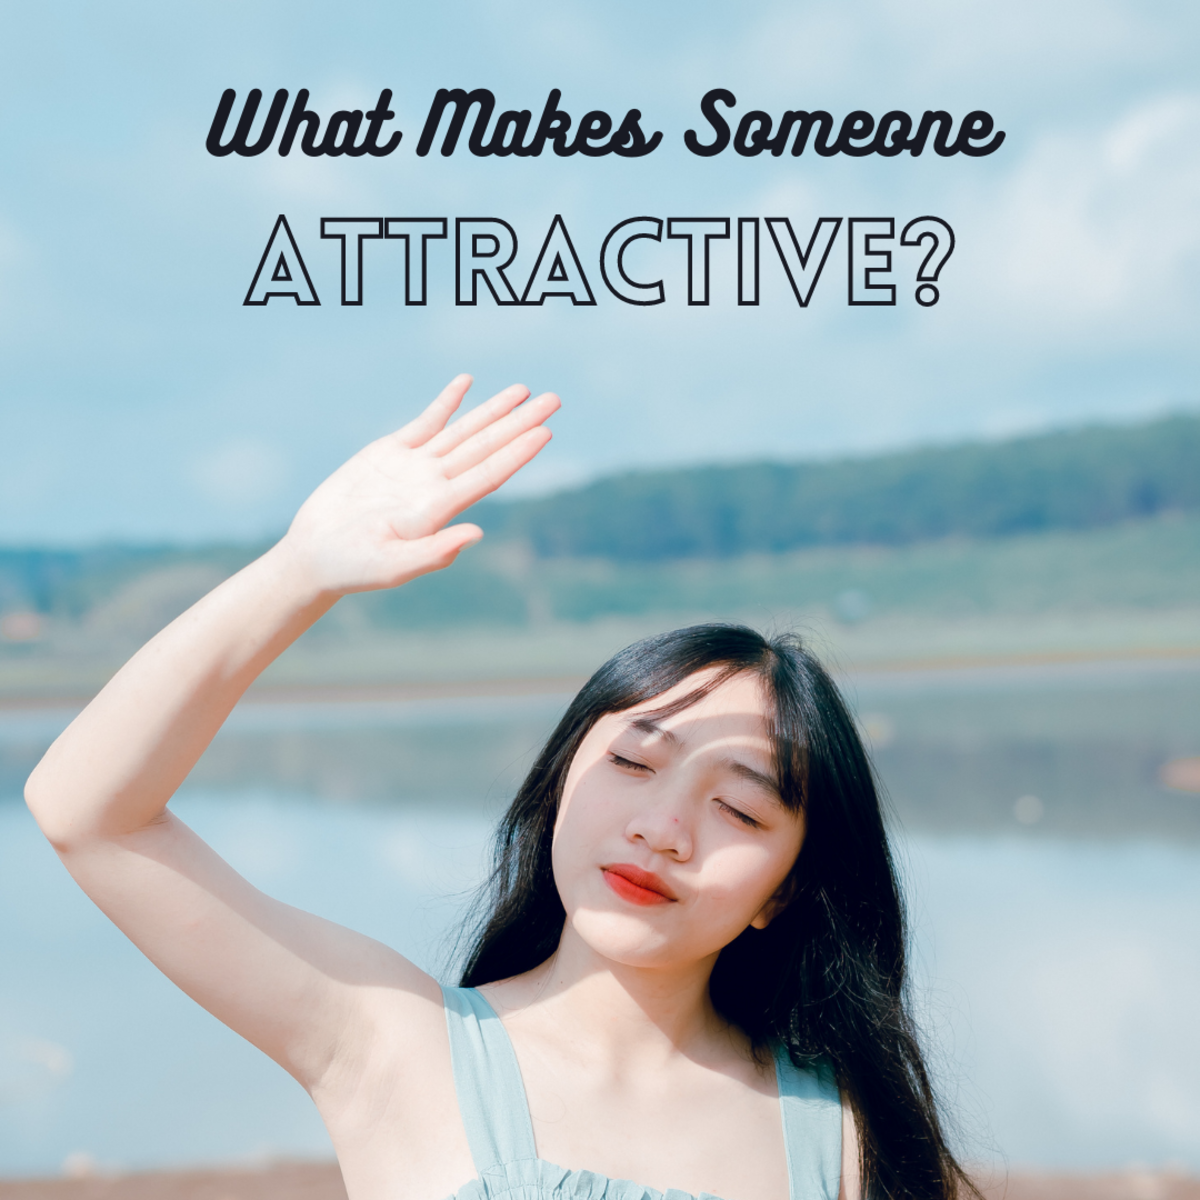 What Makes a Person Attractive or Hot?